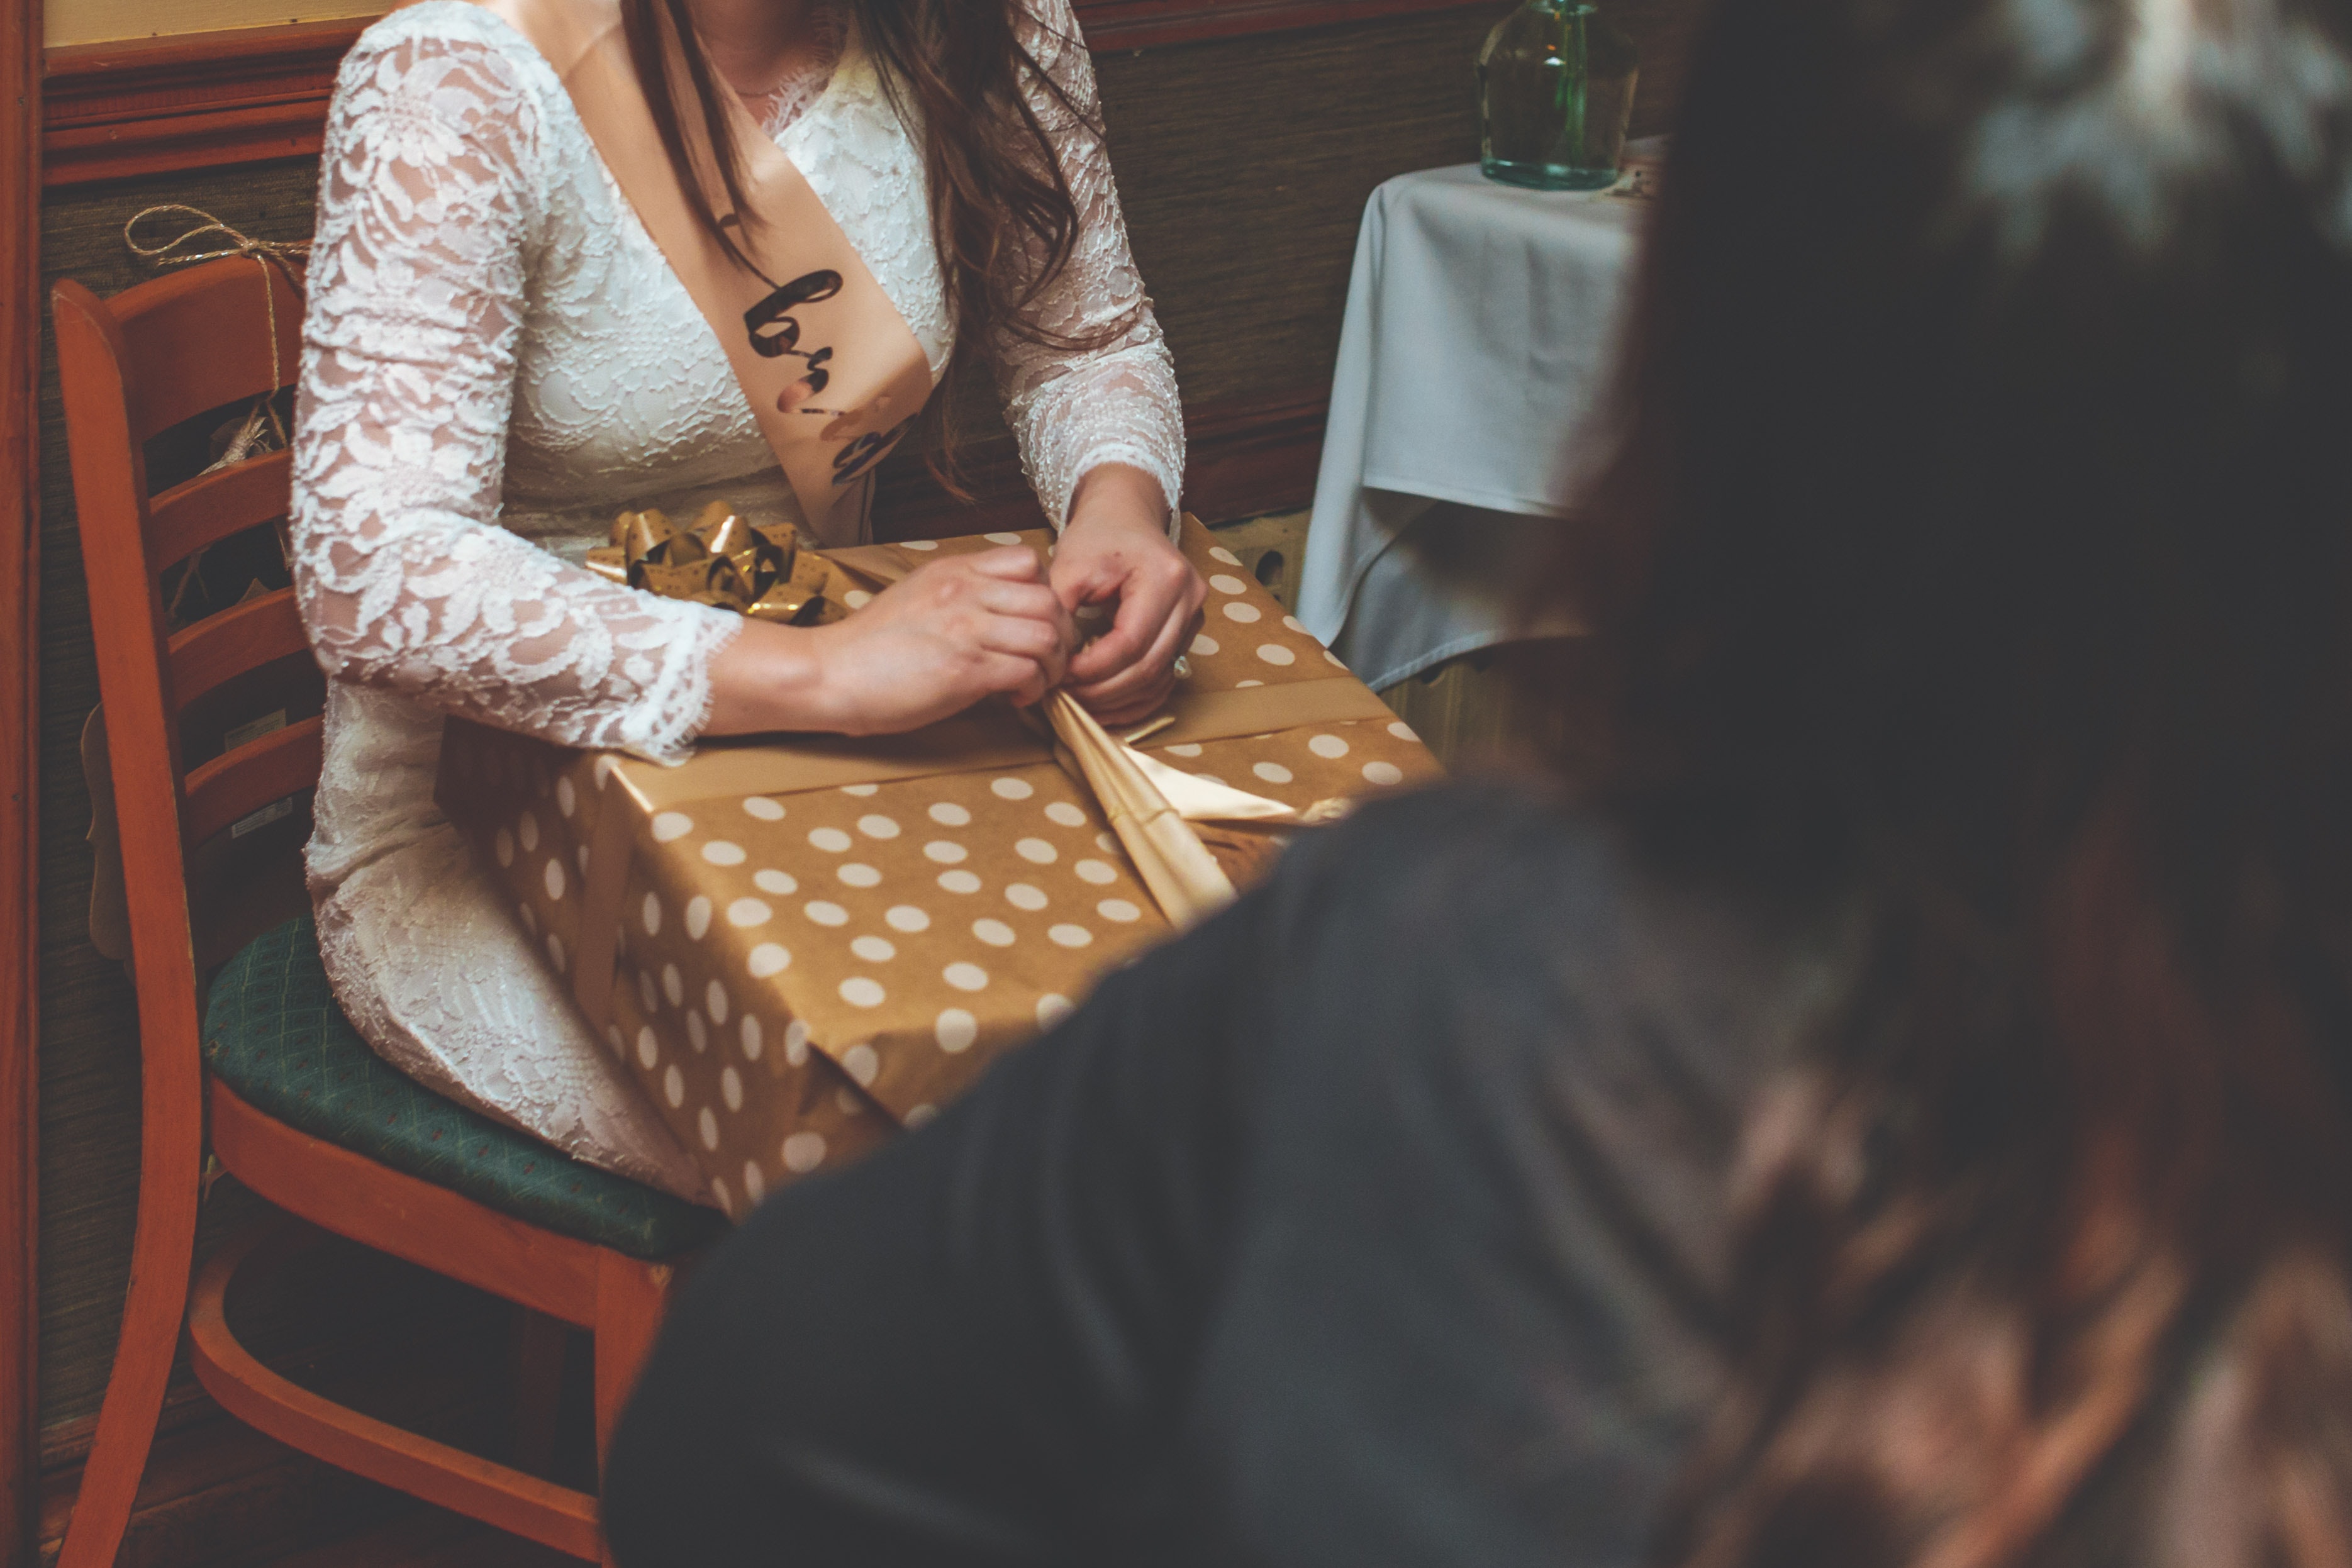 bride in white dress sitting on a wooden chair opening gifts